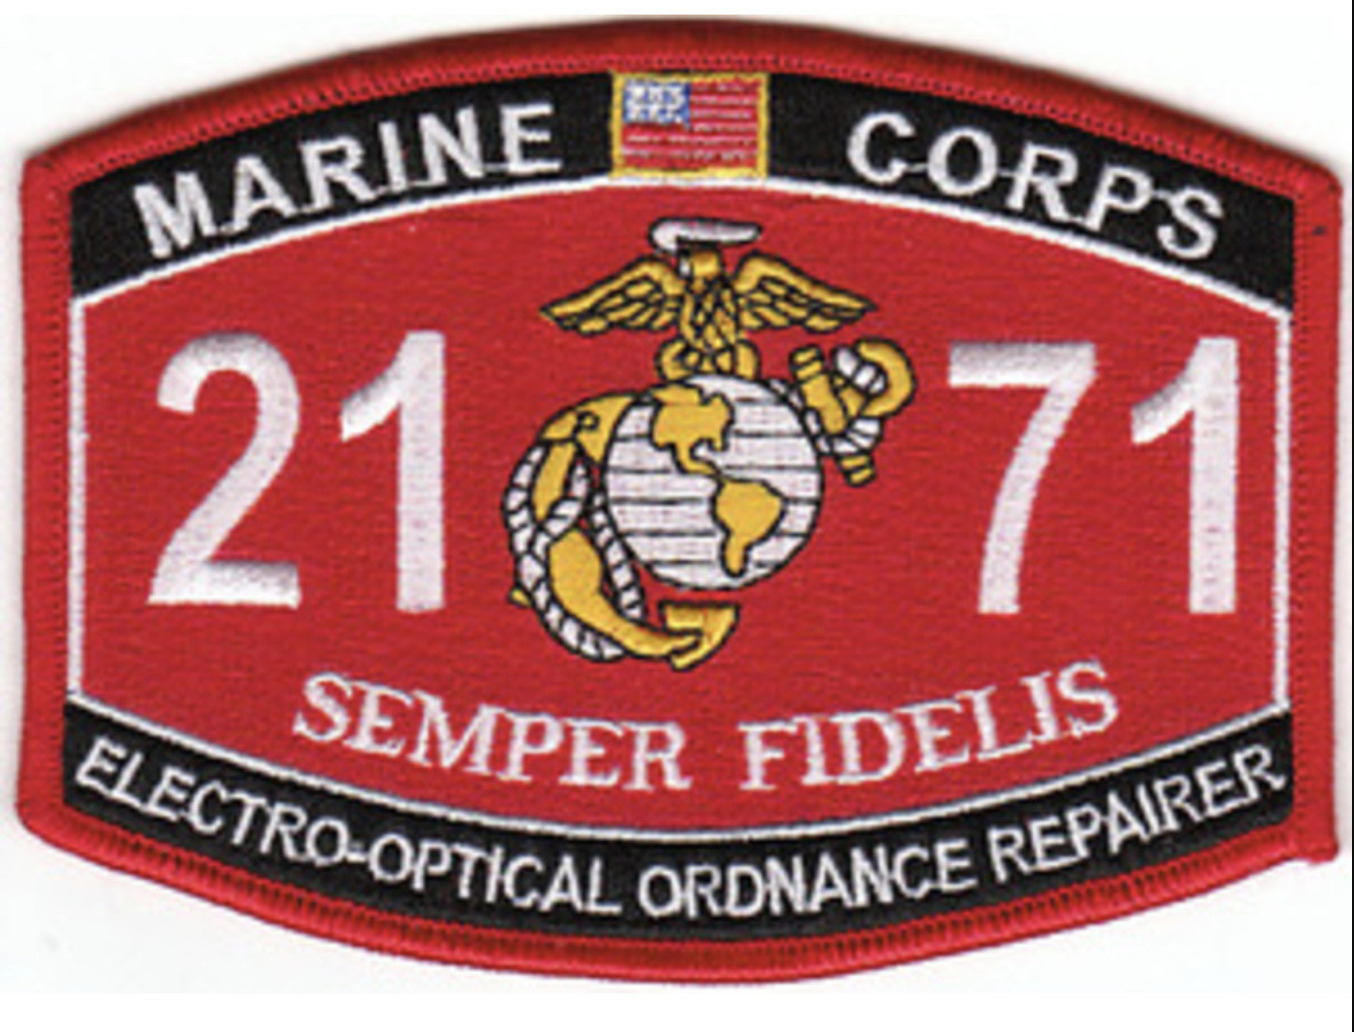 MARINE CORPS MOS 2171 ELECTRO-OPTICAL ORDNANCE REPAIRER EGA EMBROIDERED PATCH